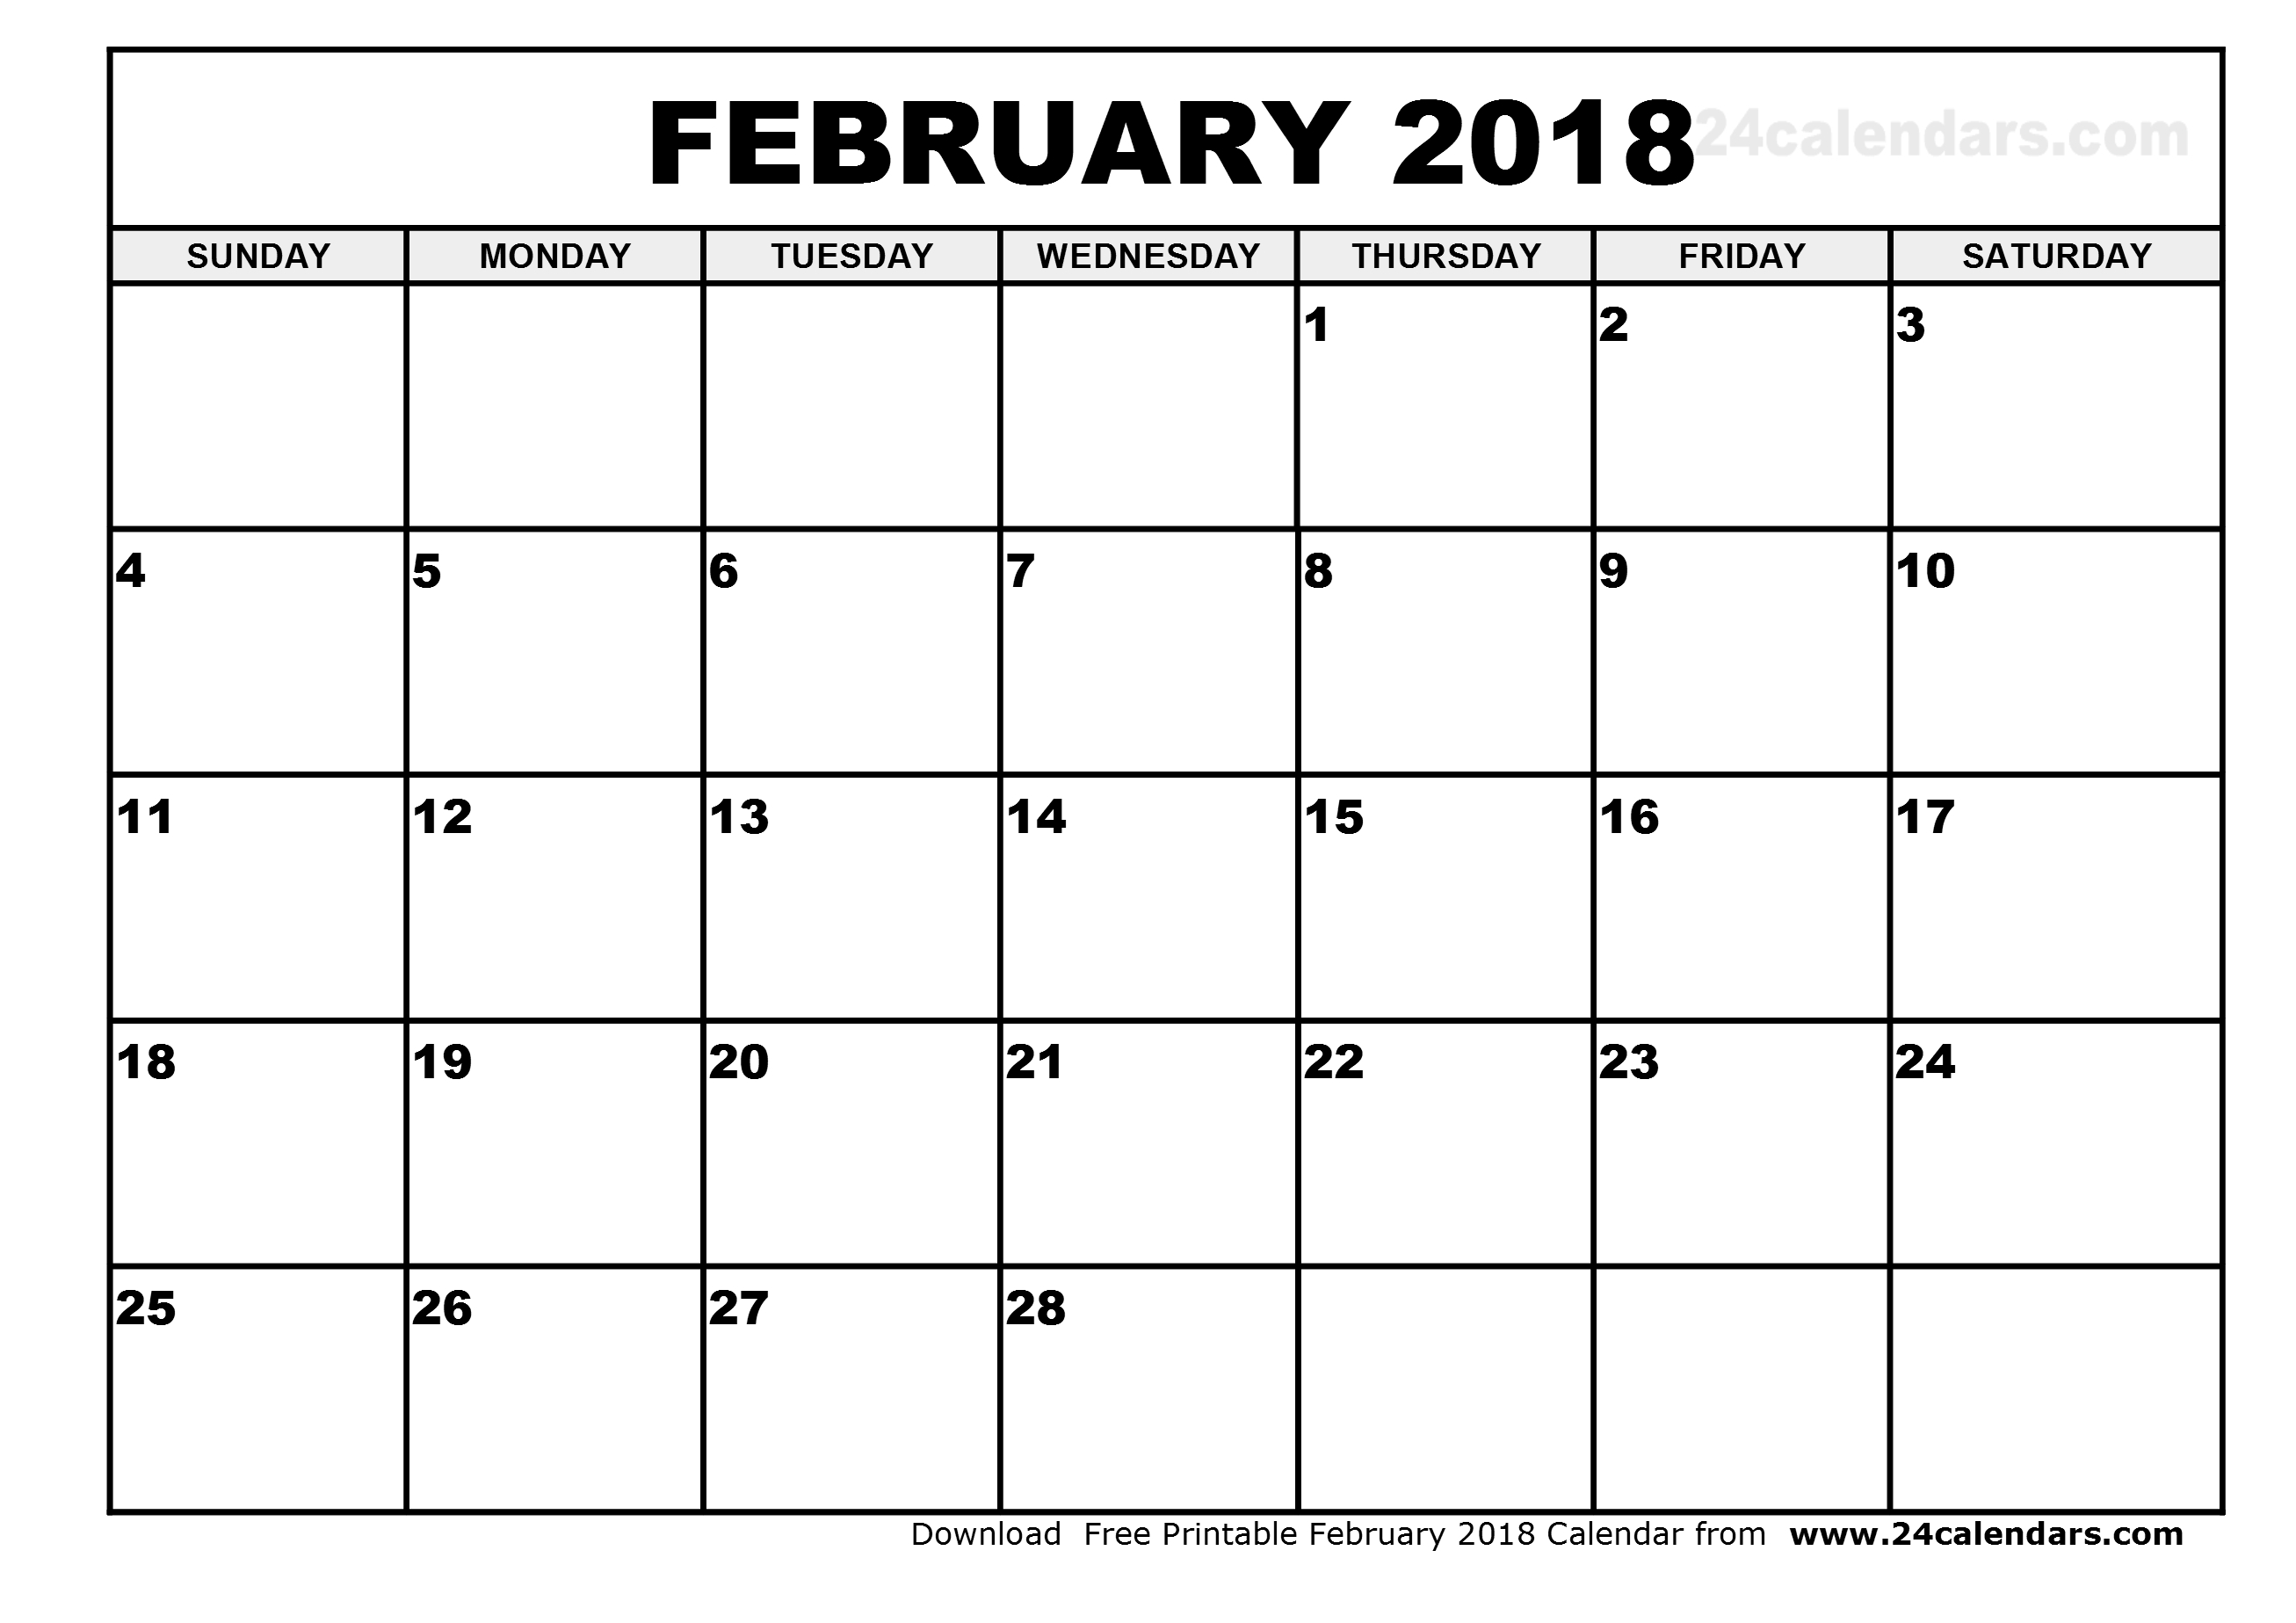 Download February 2018 calendar printable monthly